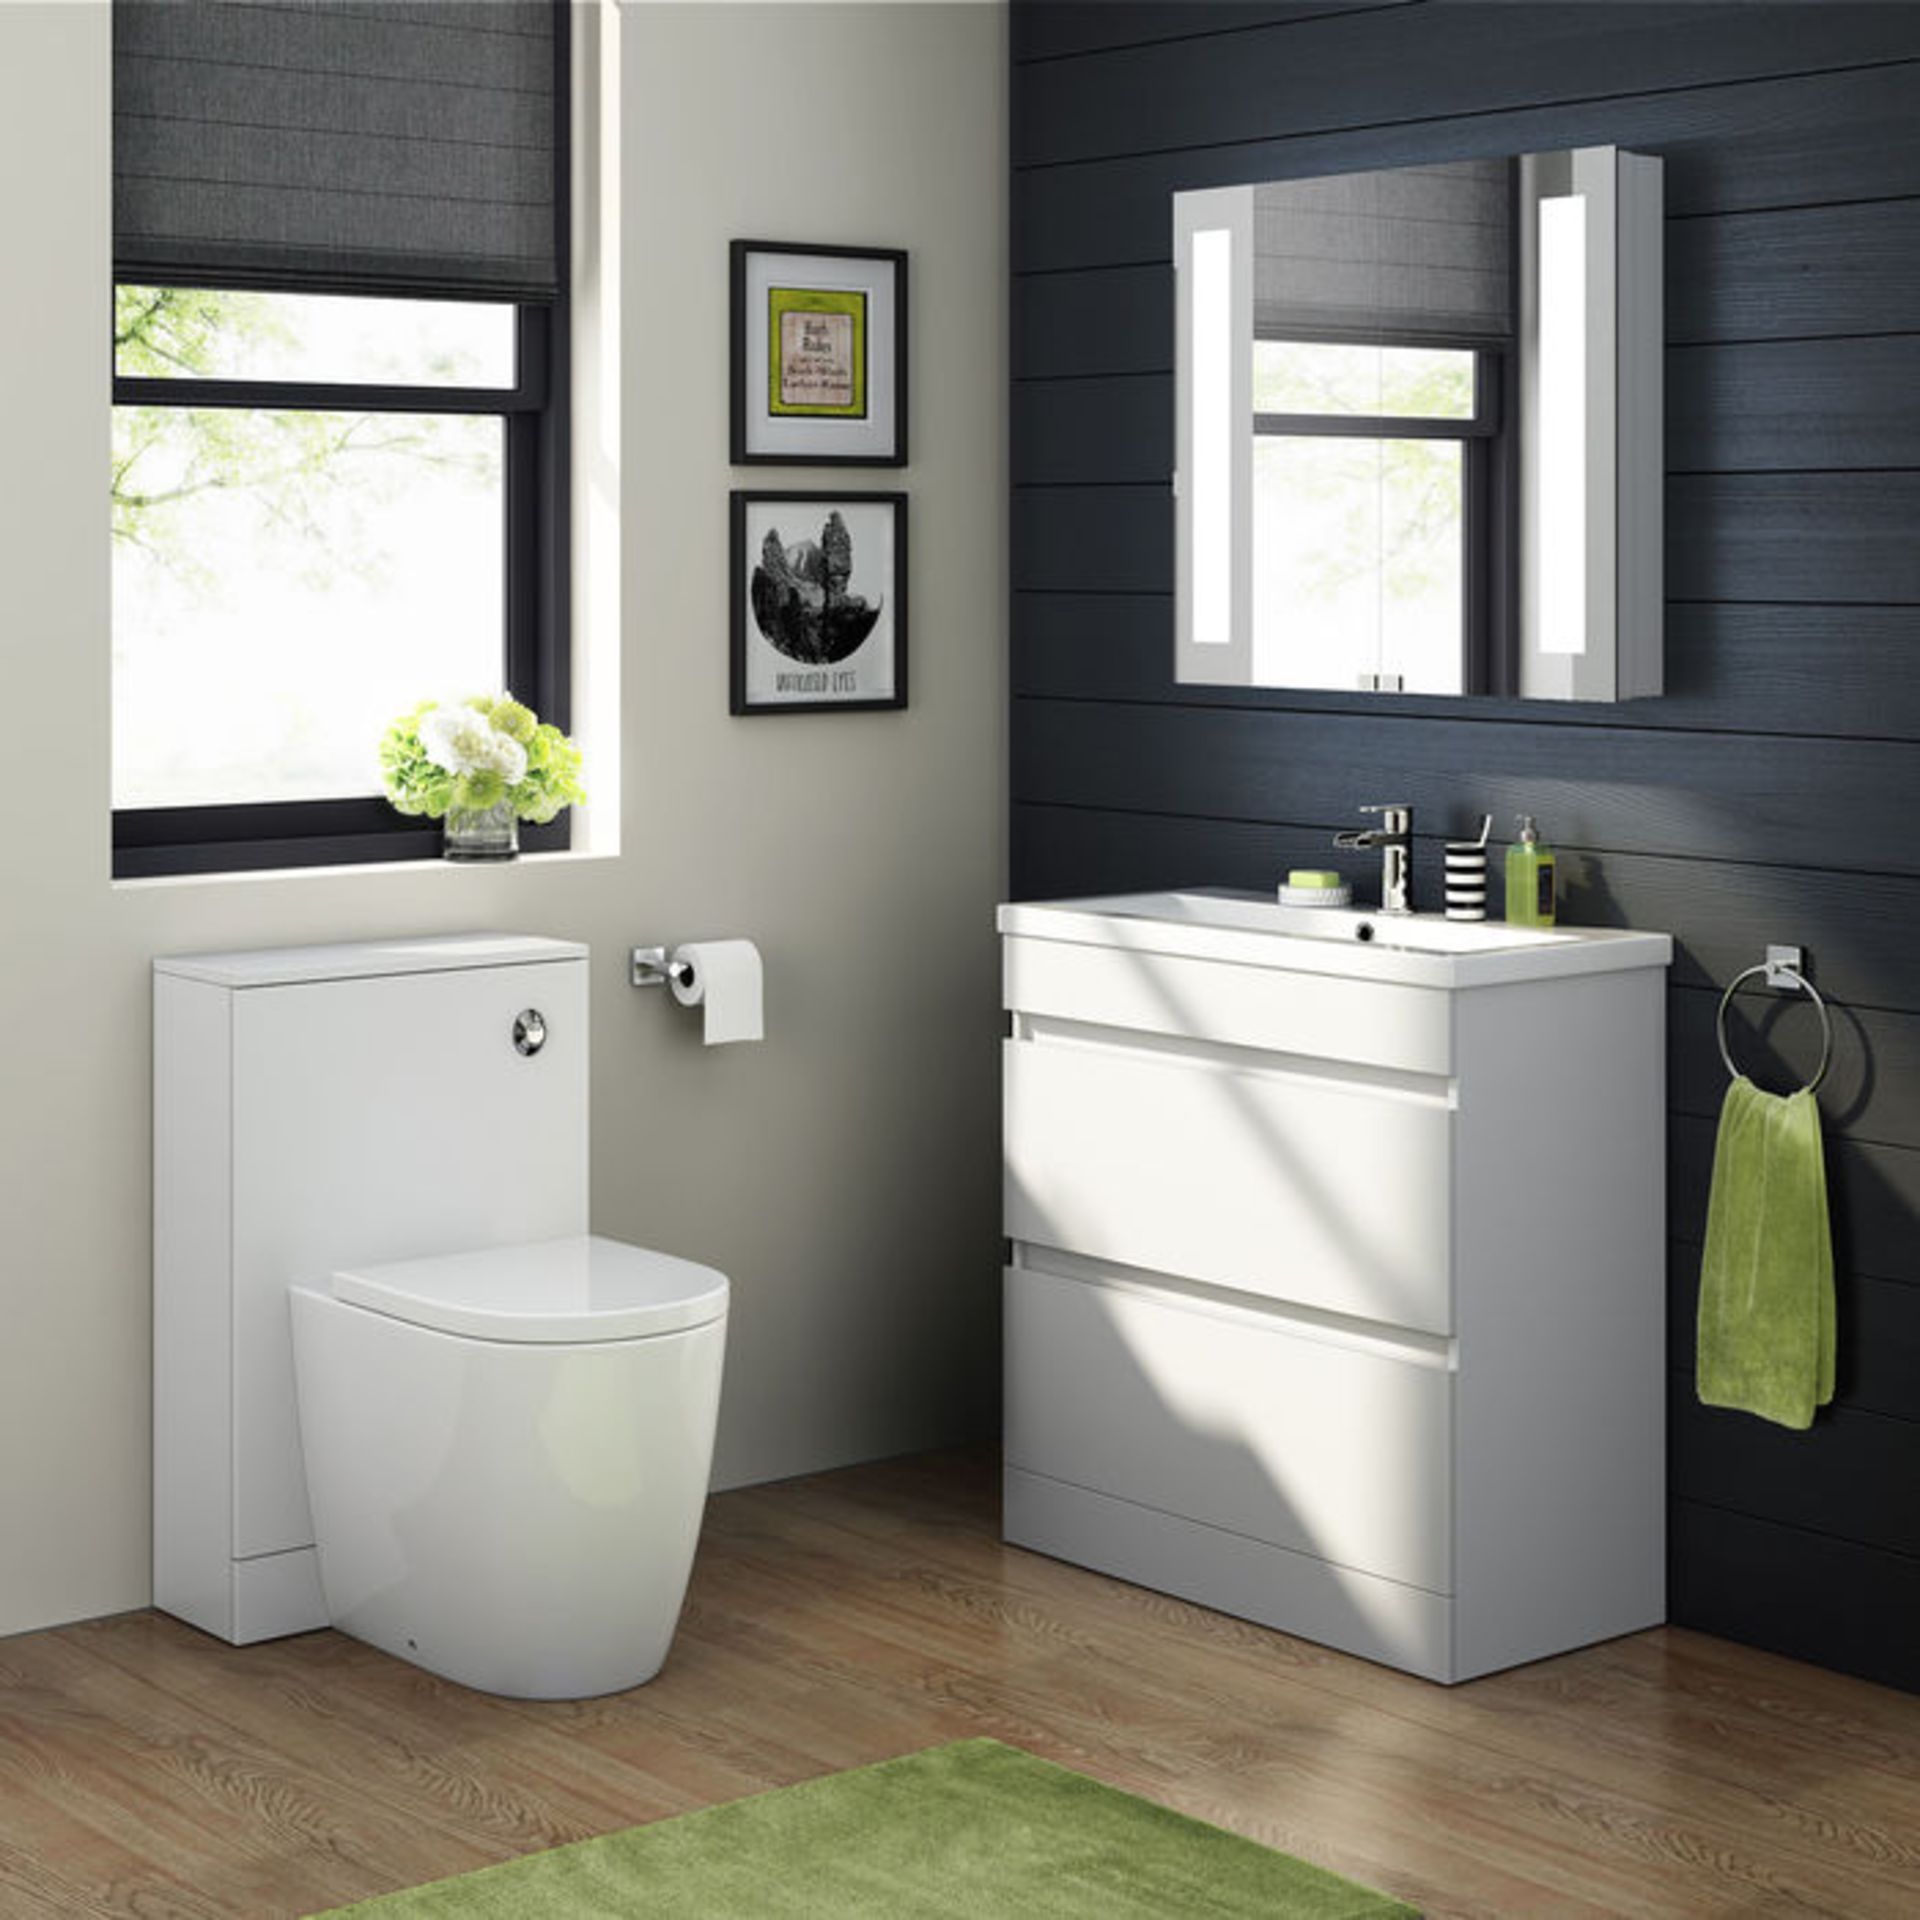 (XM185) 800mm Trent High Gloss White Double Drawer Basin Cabinet - Floor Standing. RRP £499.99. - Image 4 of 4